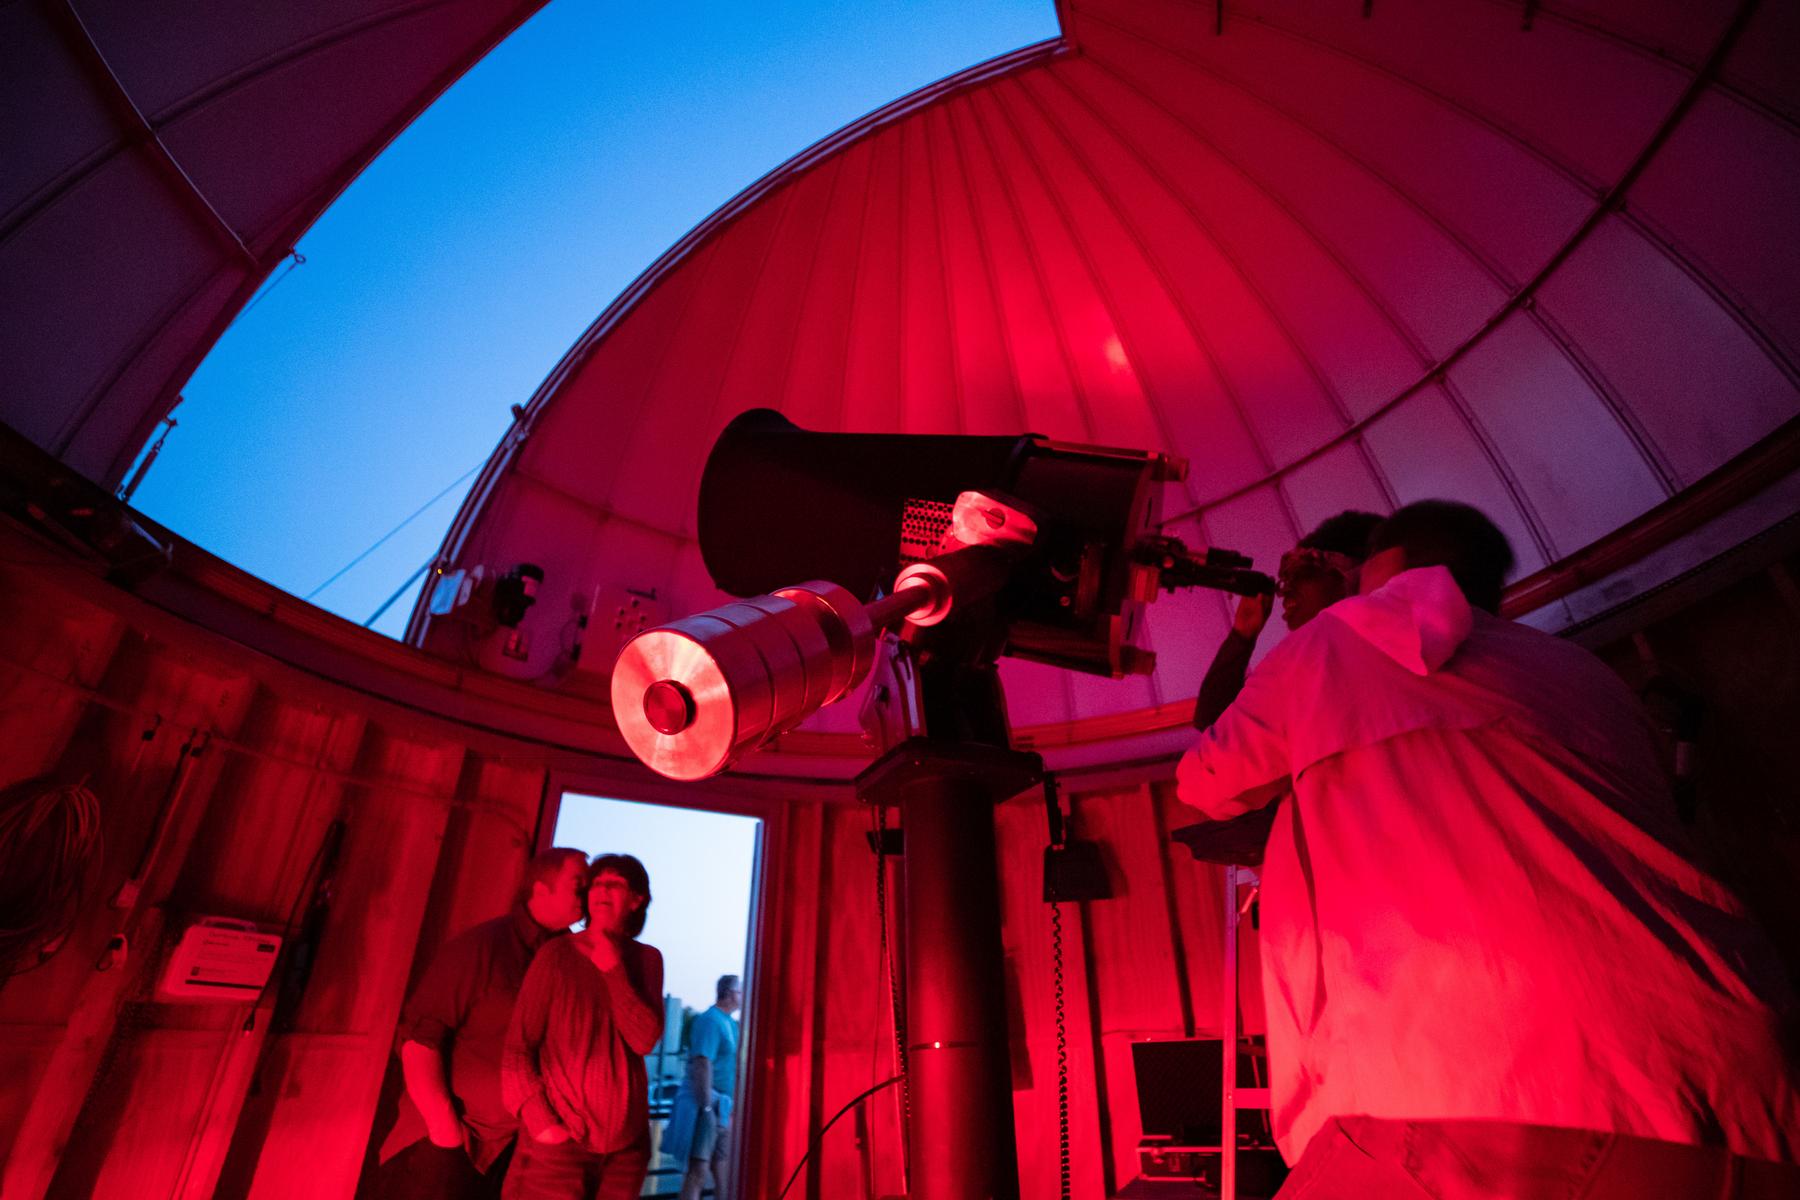 Free observatory nights are back beginning this Saturday, Sept. 23